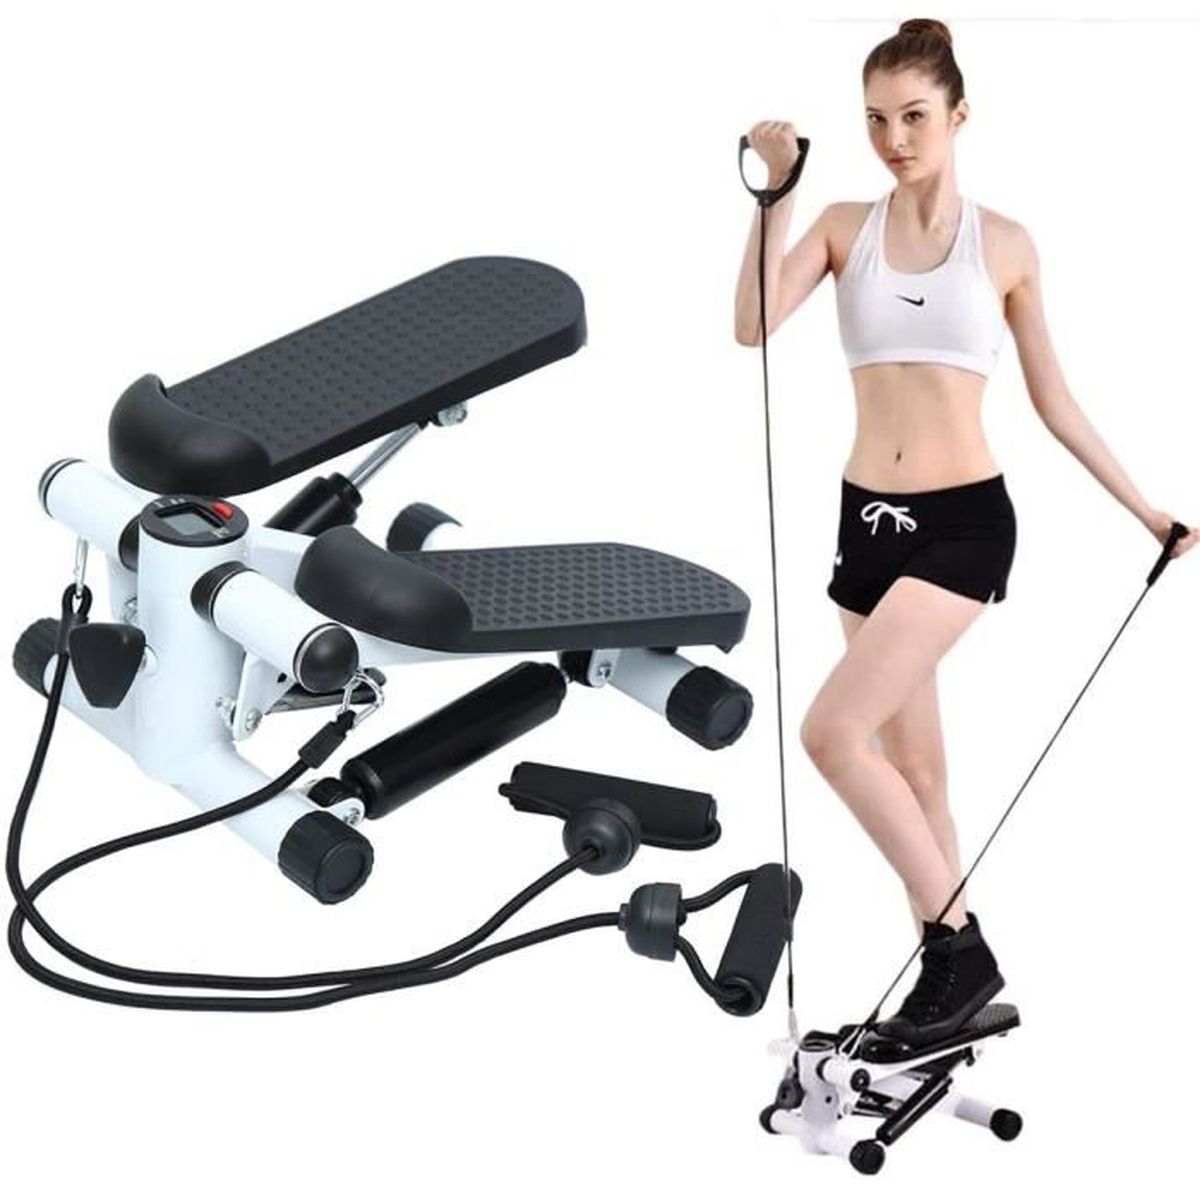 Mini Stepper Fitness Marcheur Machine Jambe Steppers Sport Musculaire Exercise 